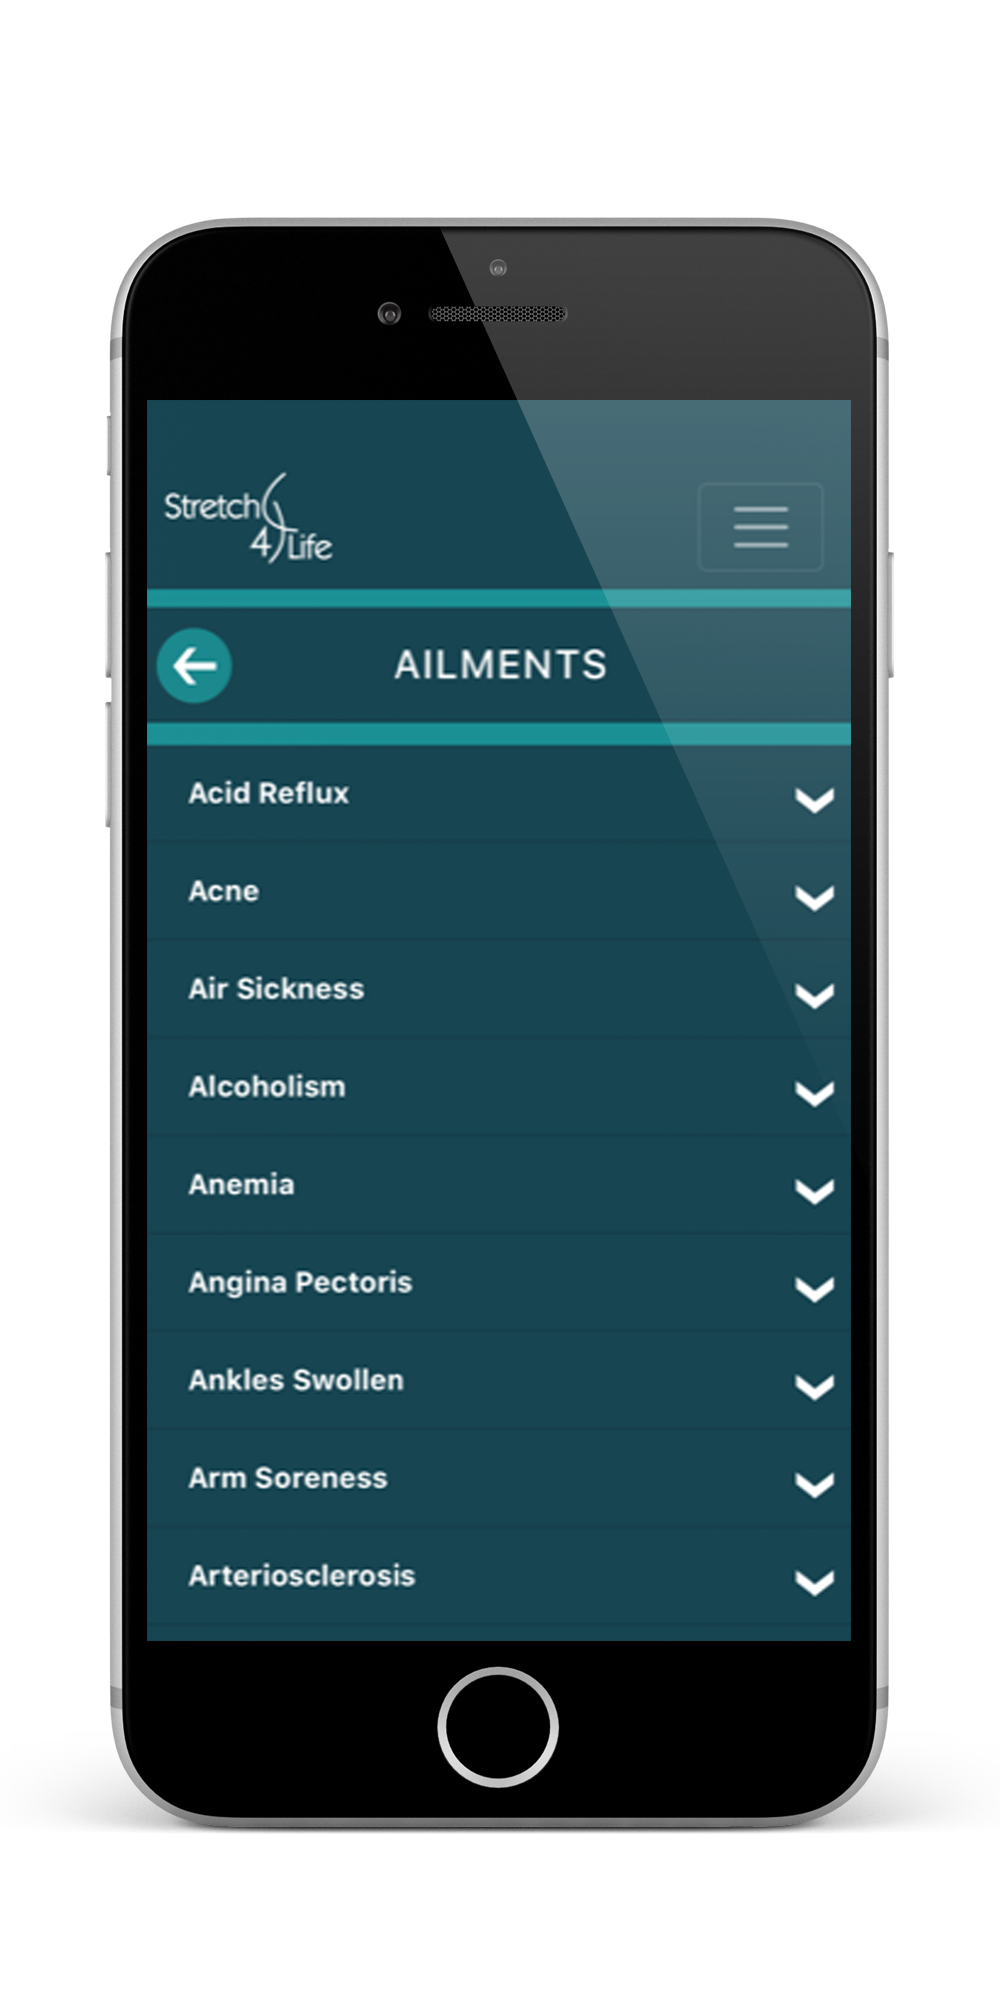 ailments app preview for stretch4life massage clinic